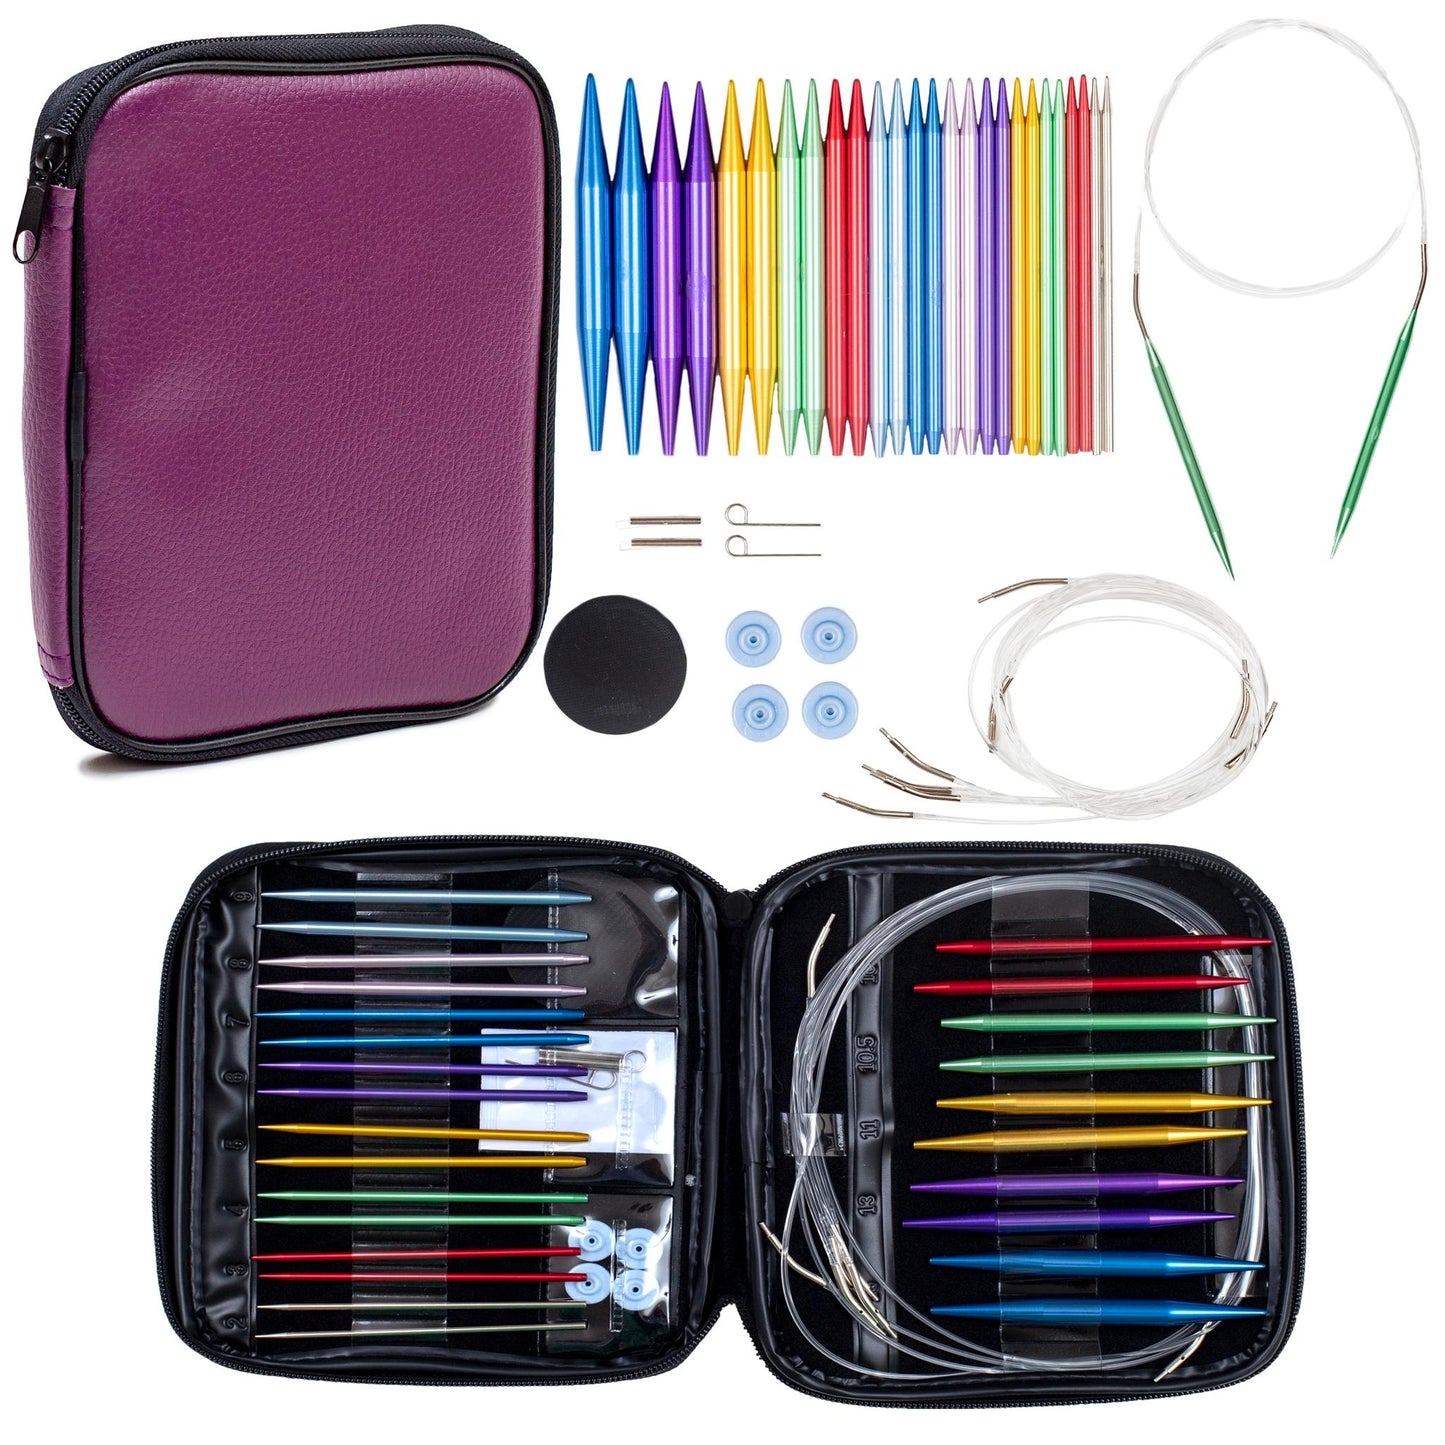 An overhead view of an interchangeable knitting needle set, showing everything that comes inside the kit. This kit also comes in a purple travel case for your aluminum knitting needles.